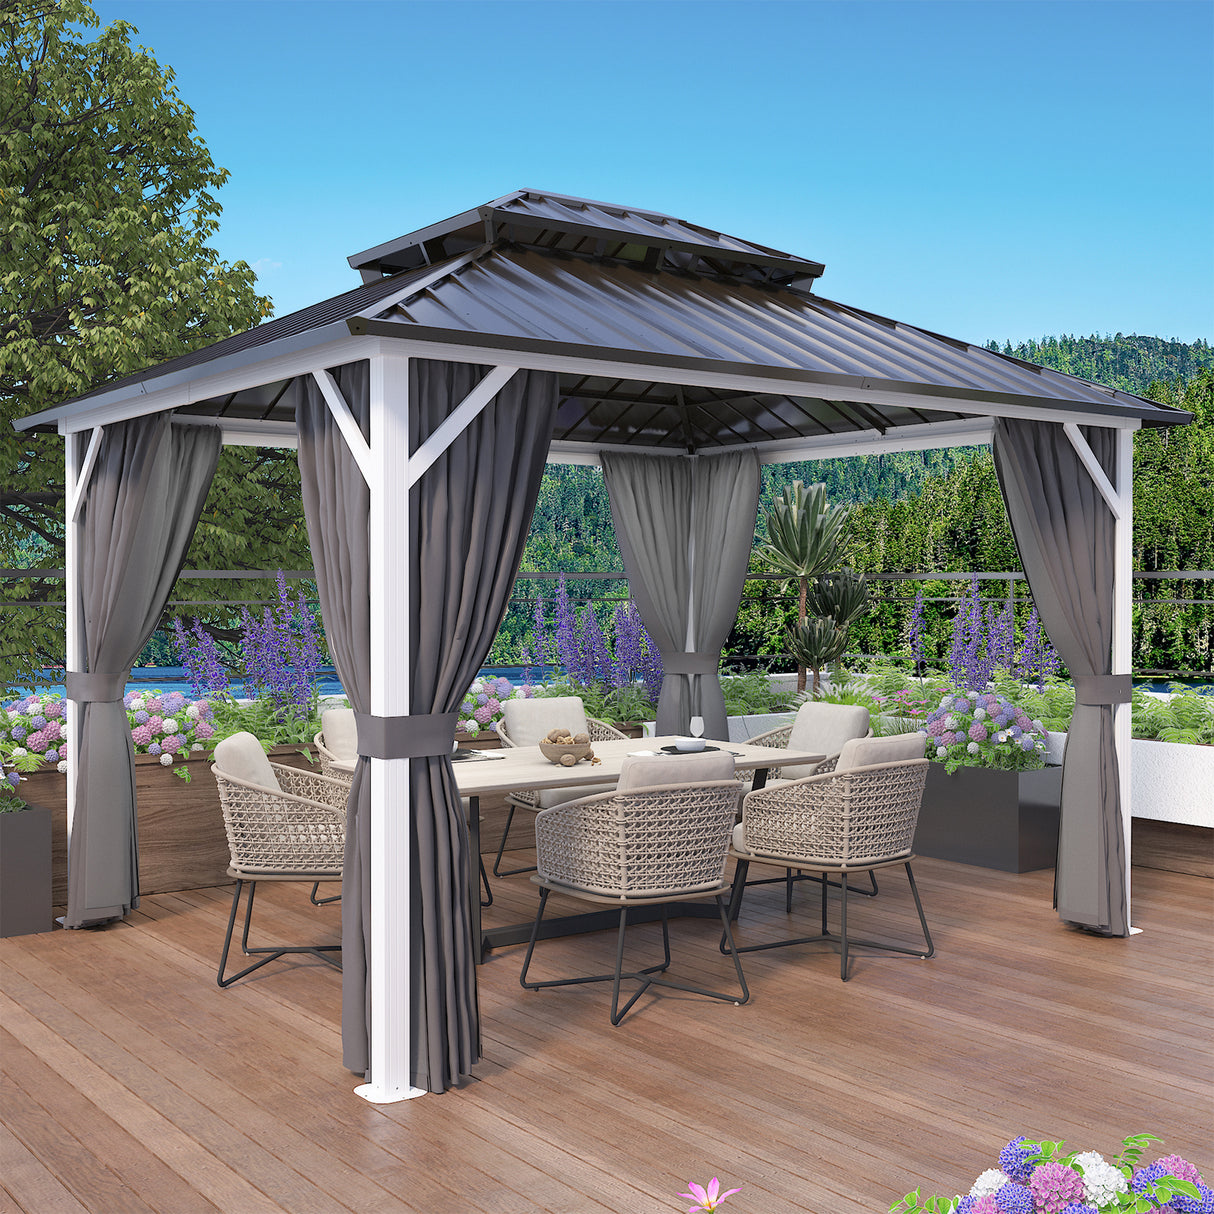 EAGLE PEAK Outdoor Aluminum Frame Galvanized Double Roof Gazebo, Includes Netting and Curtains